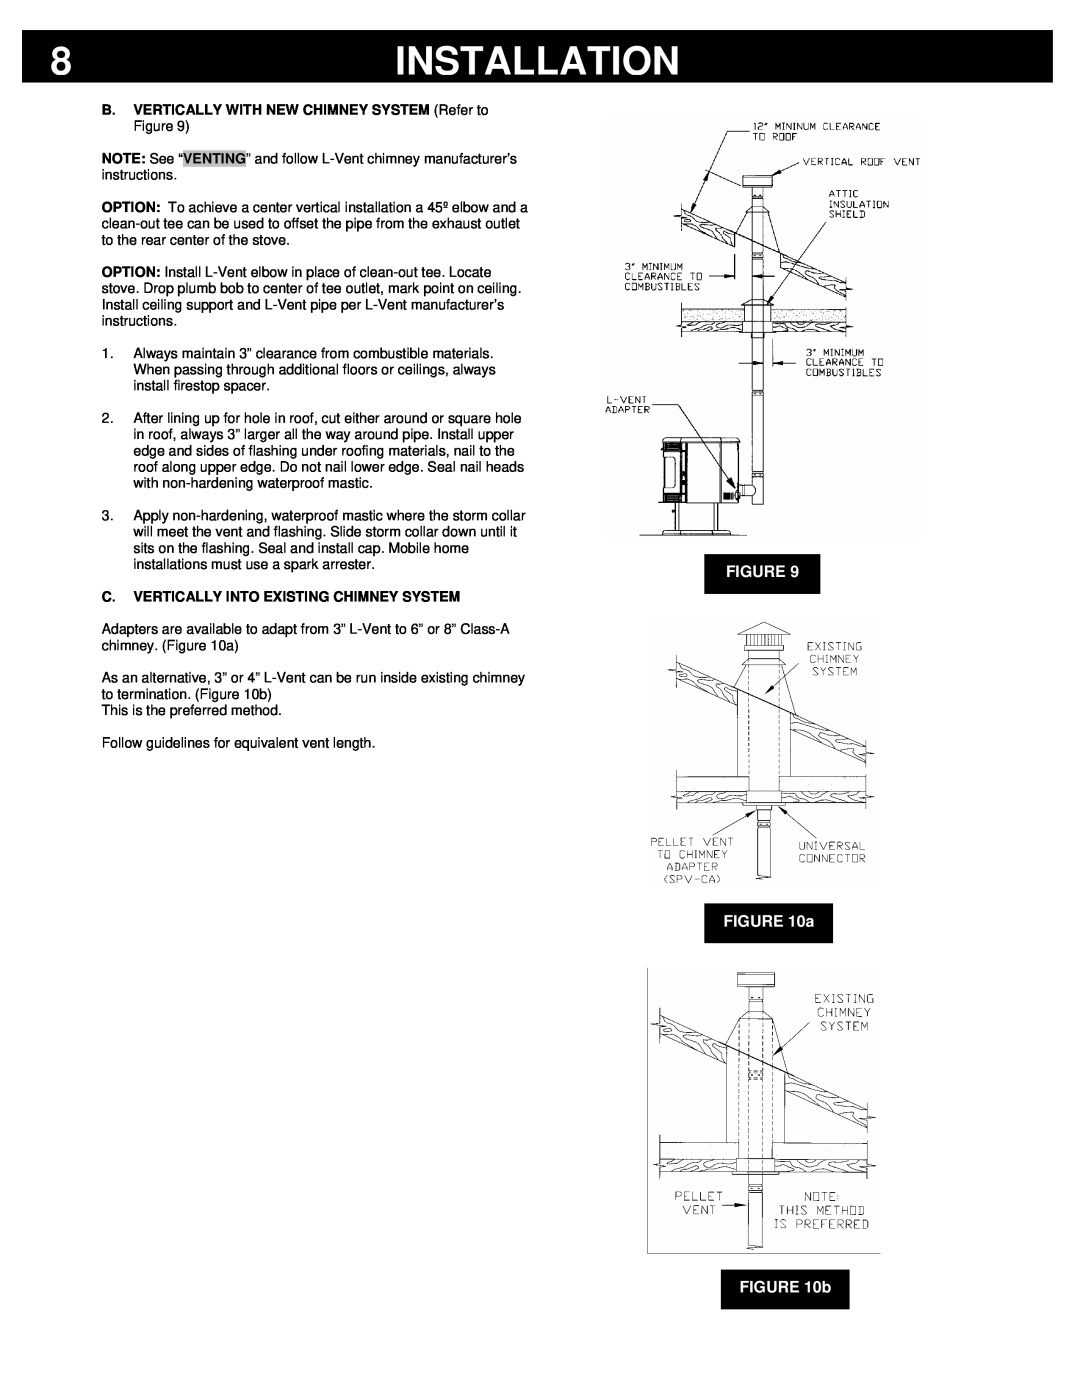 Breckwell P2000I, P2000FS owner manual Installation, FIGURE a b, C.Vertically Into Existing Chimney System 